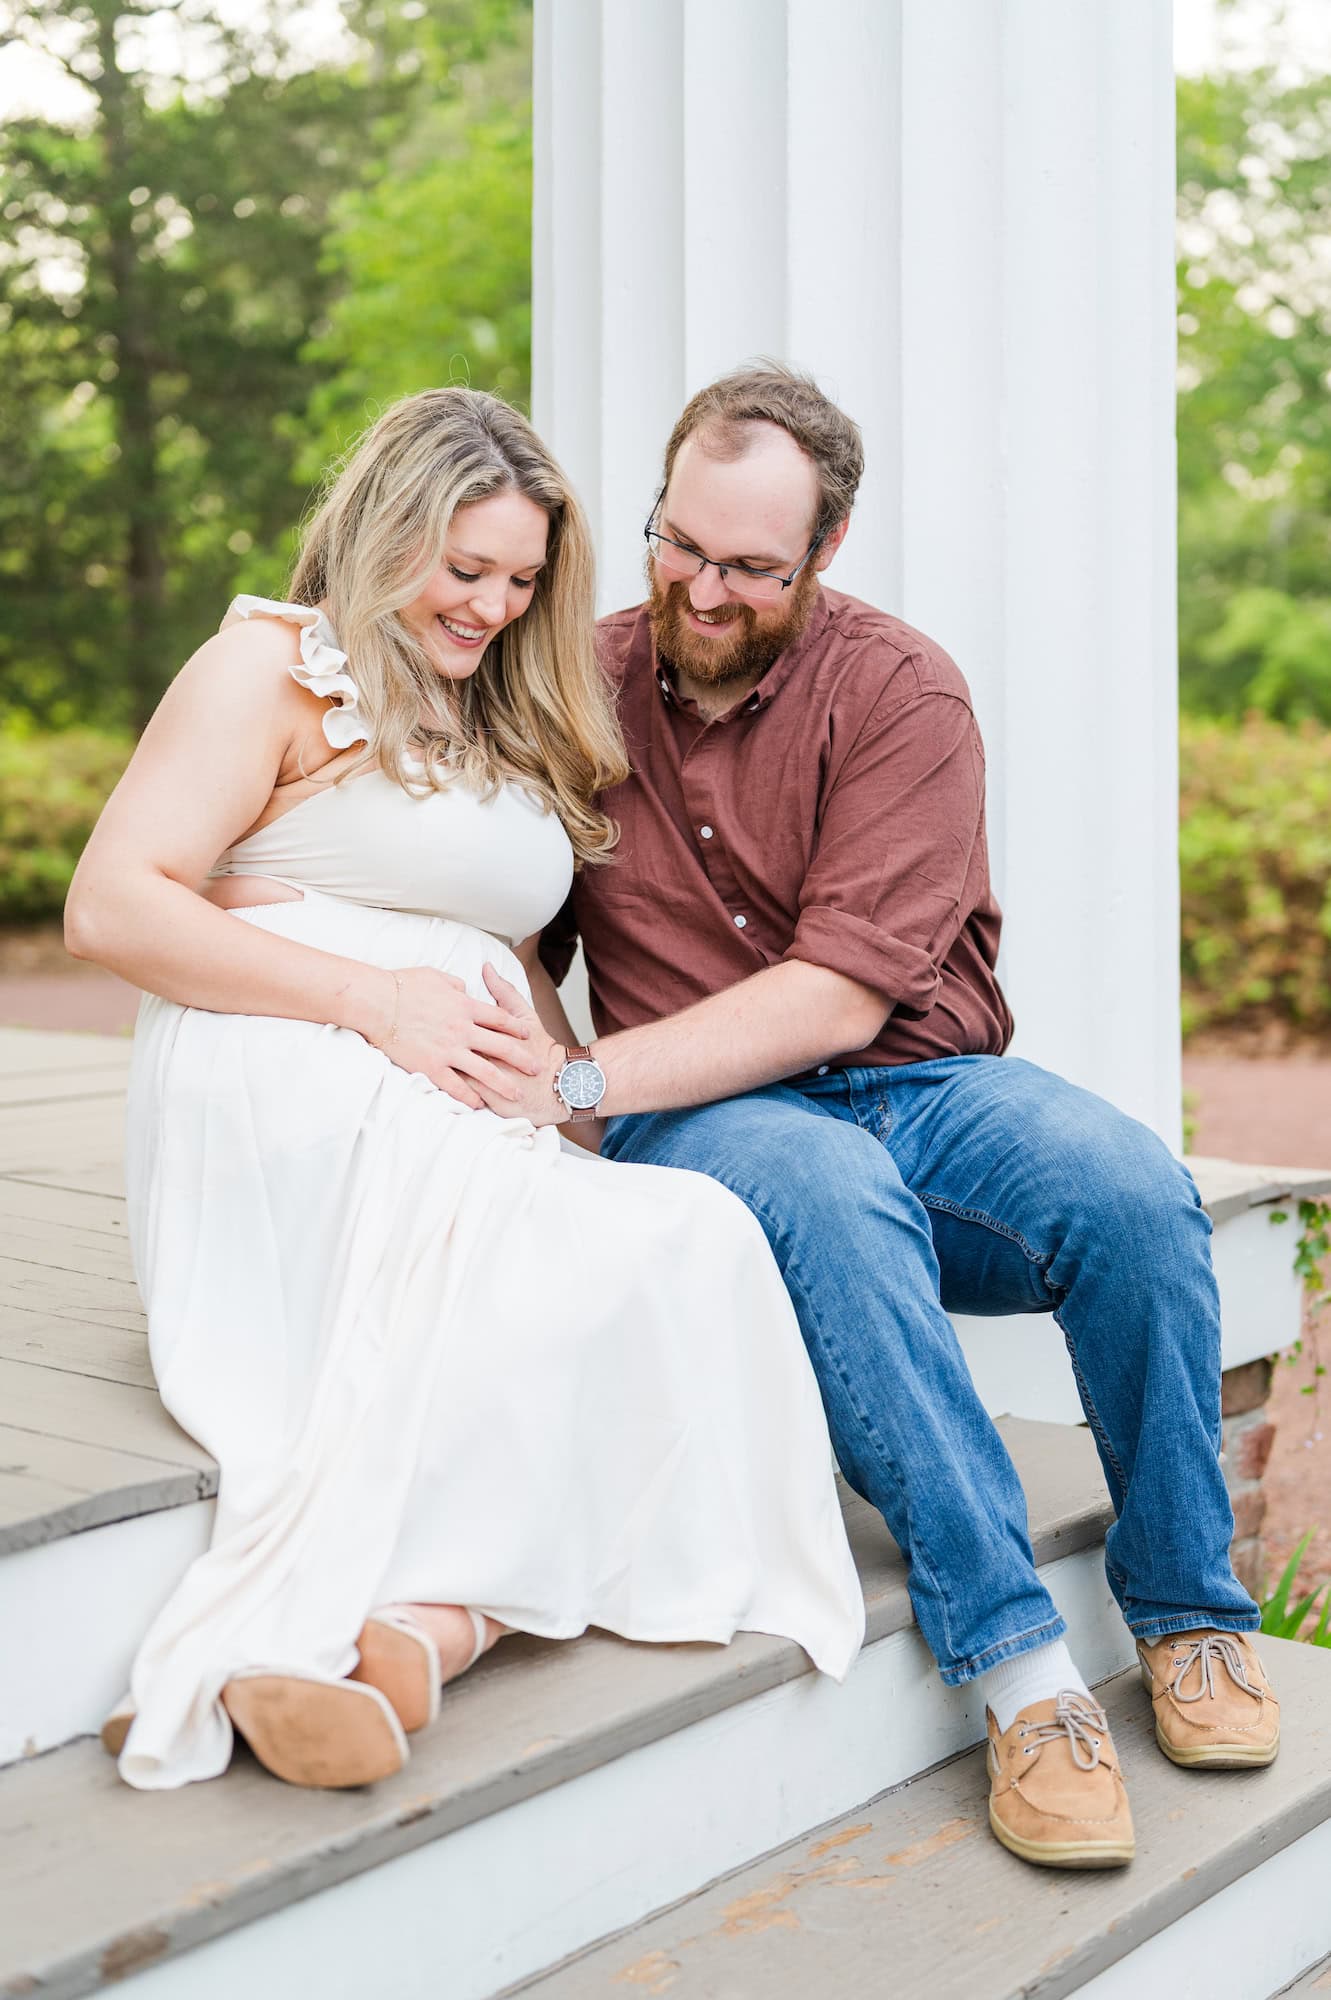 gender reveal photoshoot, baby announcement, downtown roswell georgia 